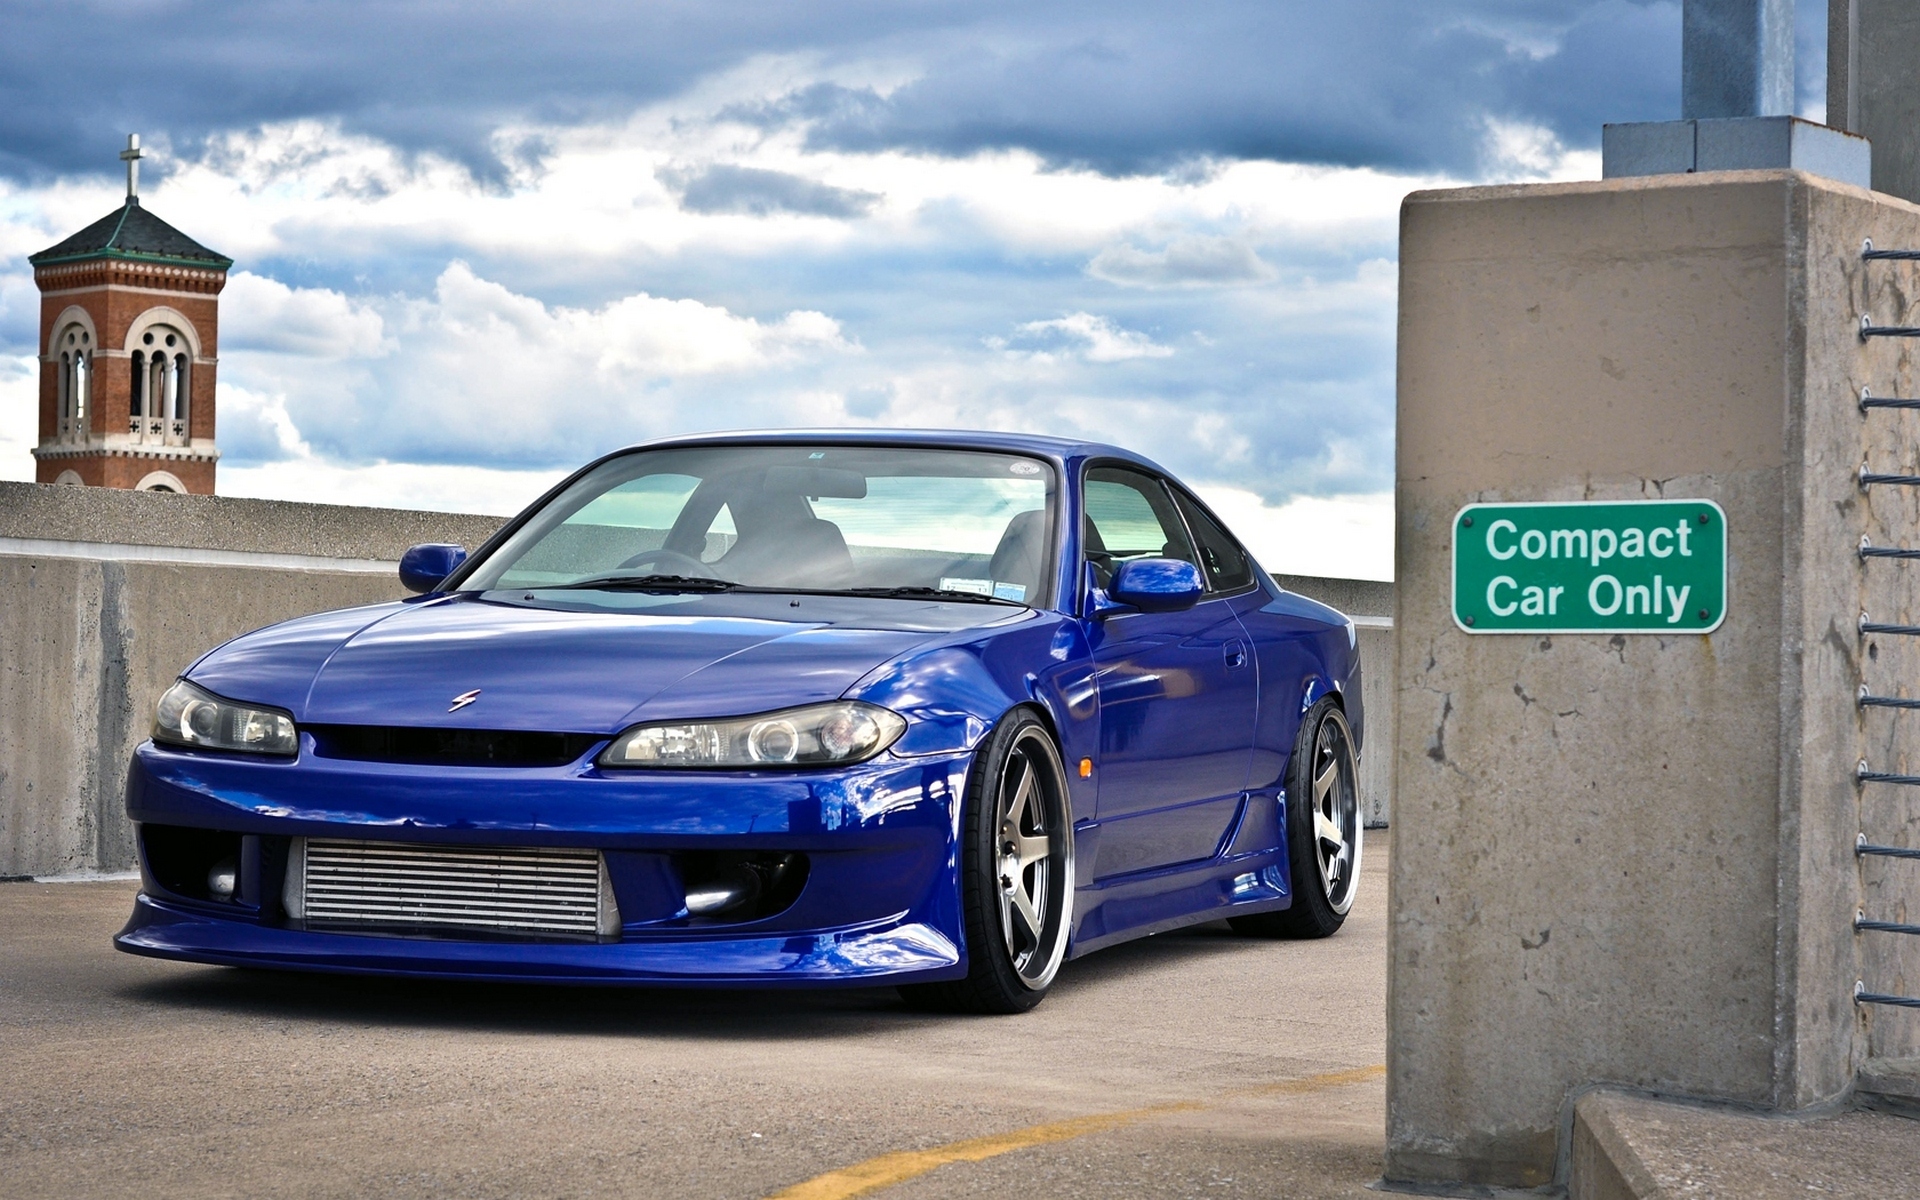 Free Download Nissan Silvia S15 Jdm Tuning Wallpaper 19x10 846 19x10 For Your Desktop Mobile Tablet Explore 94 Nissan Silvia S15 Wallpapers Nissan Silvia S15 Wallpaper Nissan Silvia S15